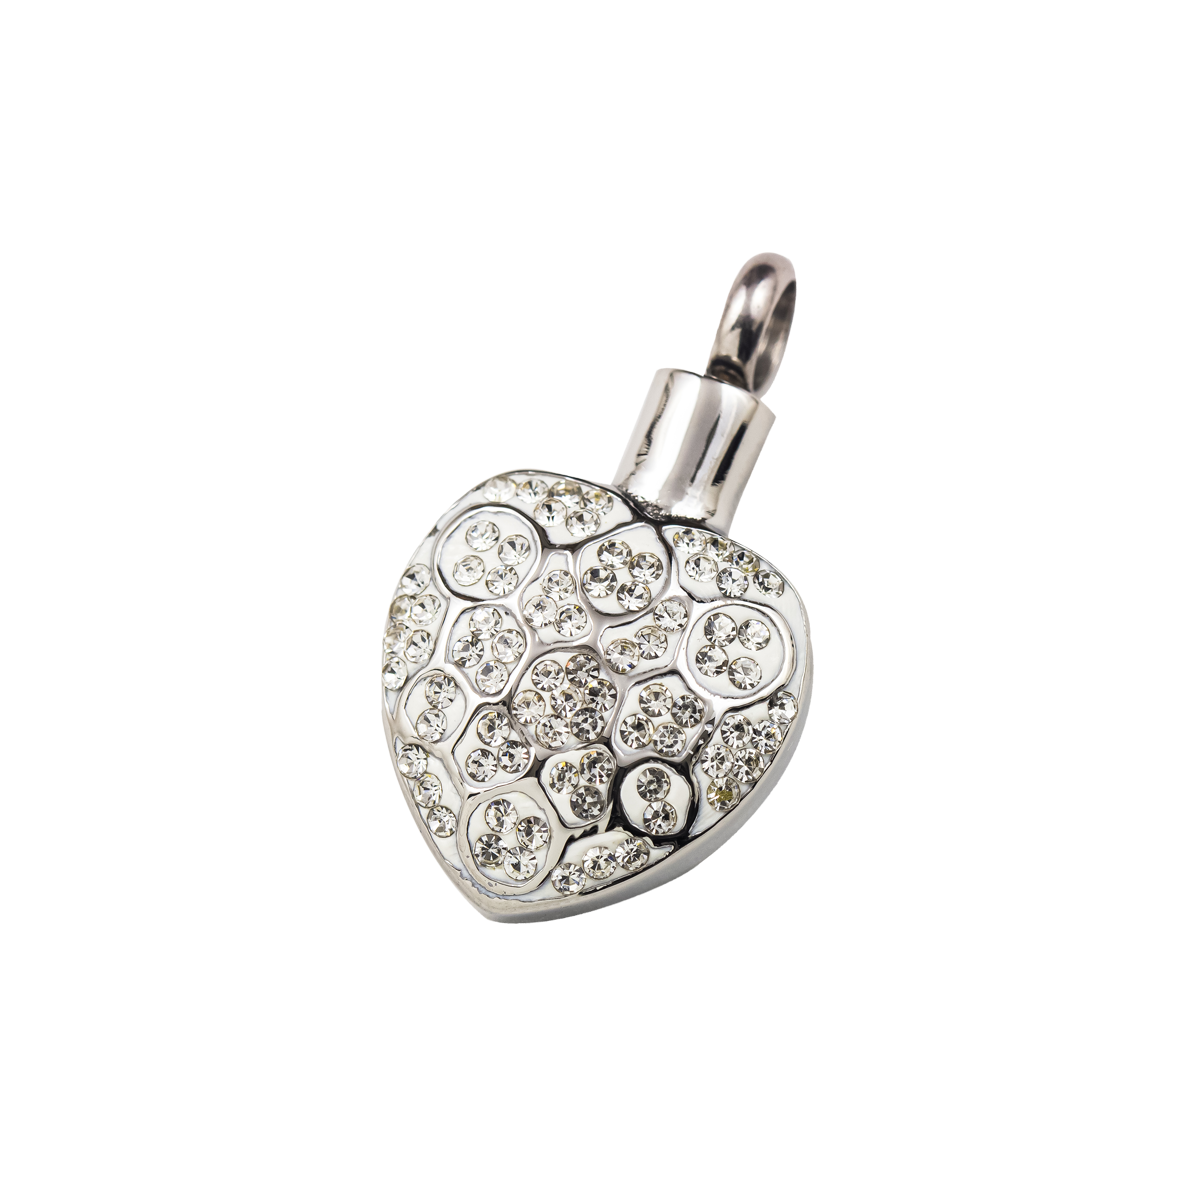 Bedazzled Heart Stainless Steel Penant